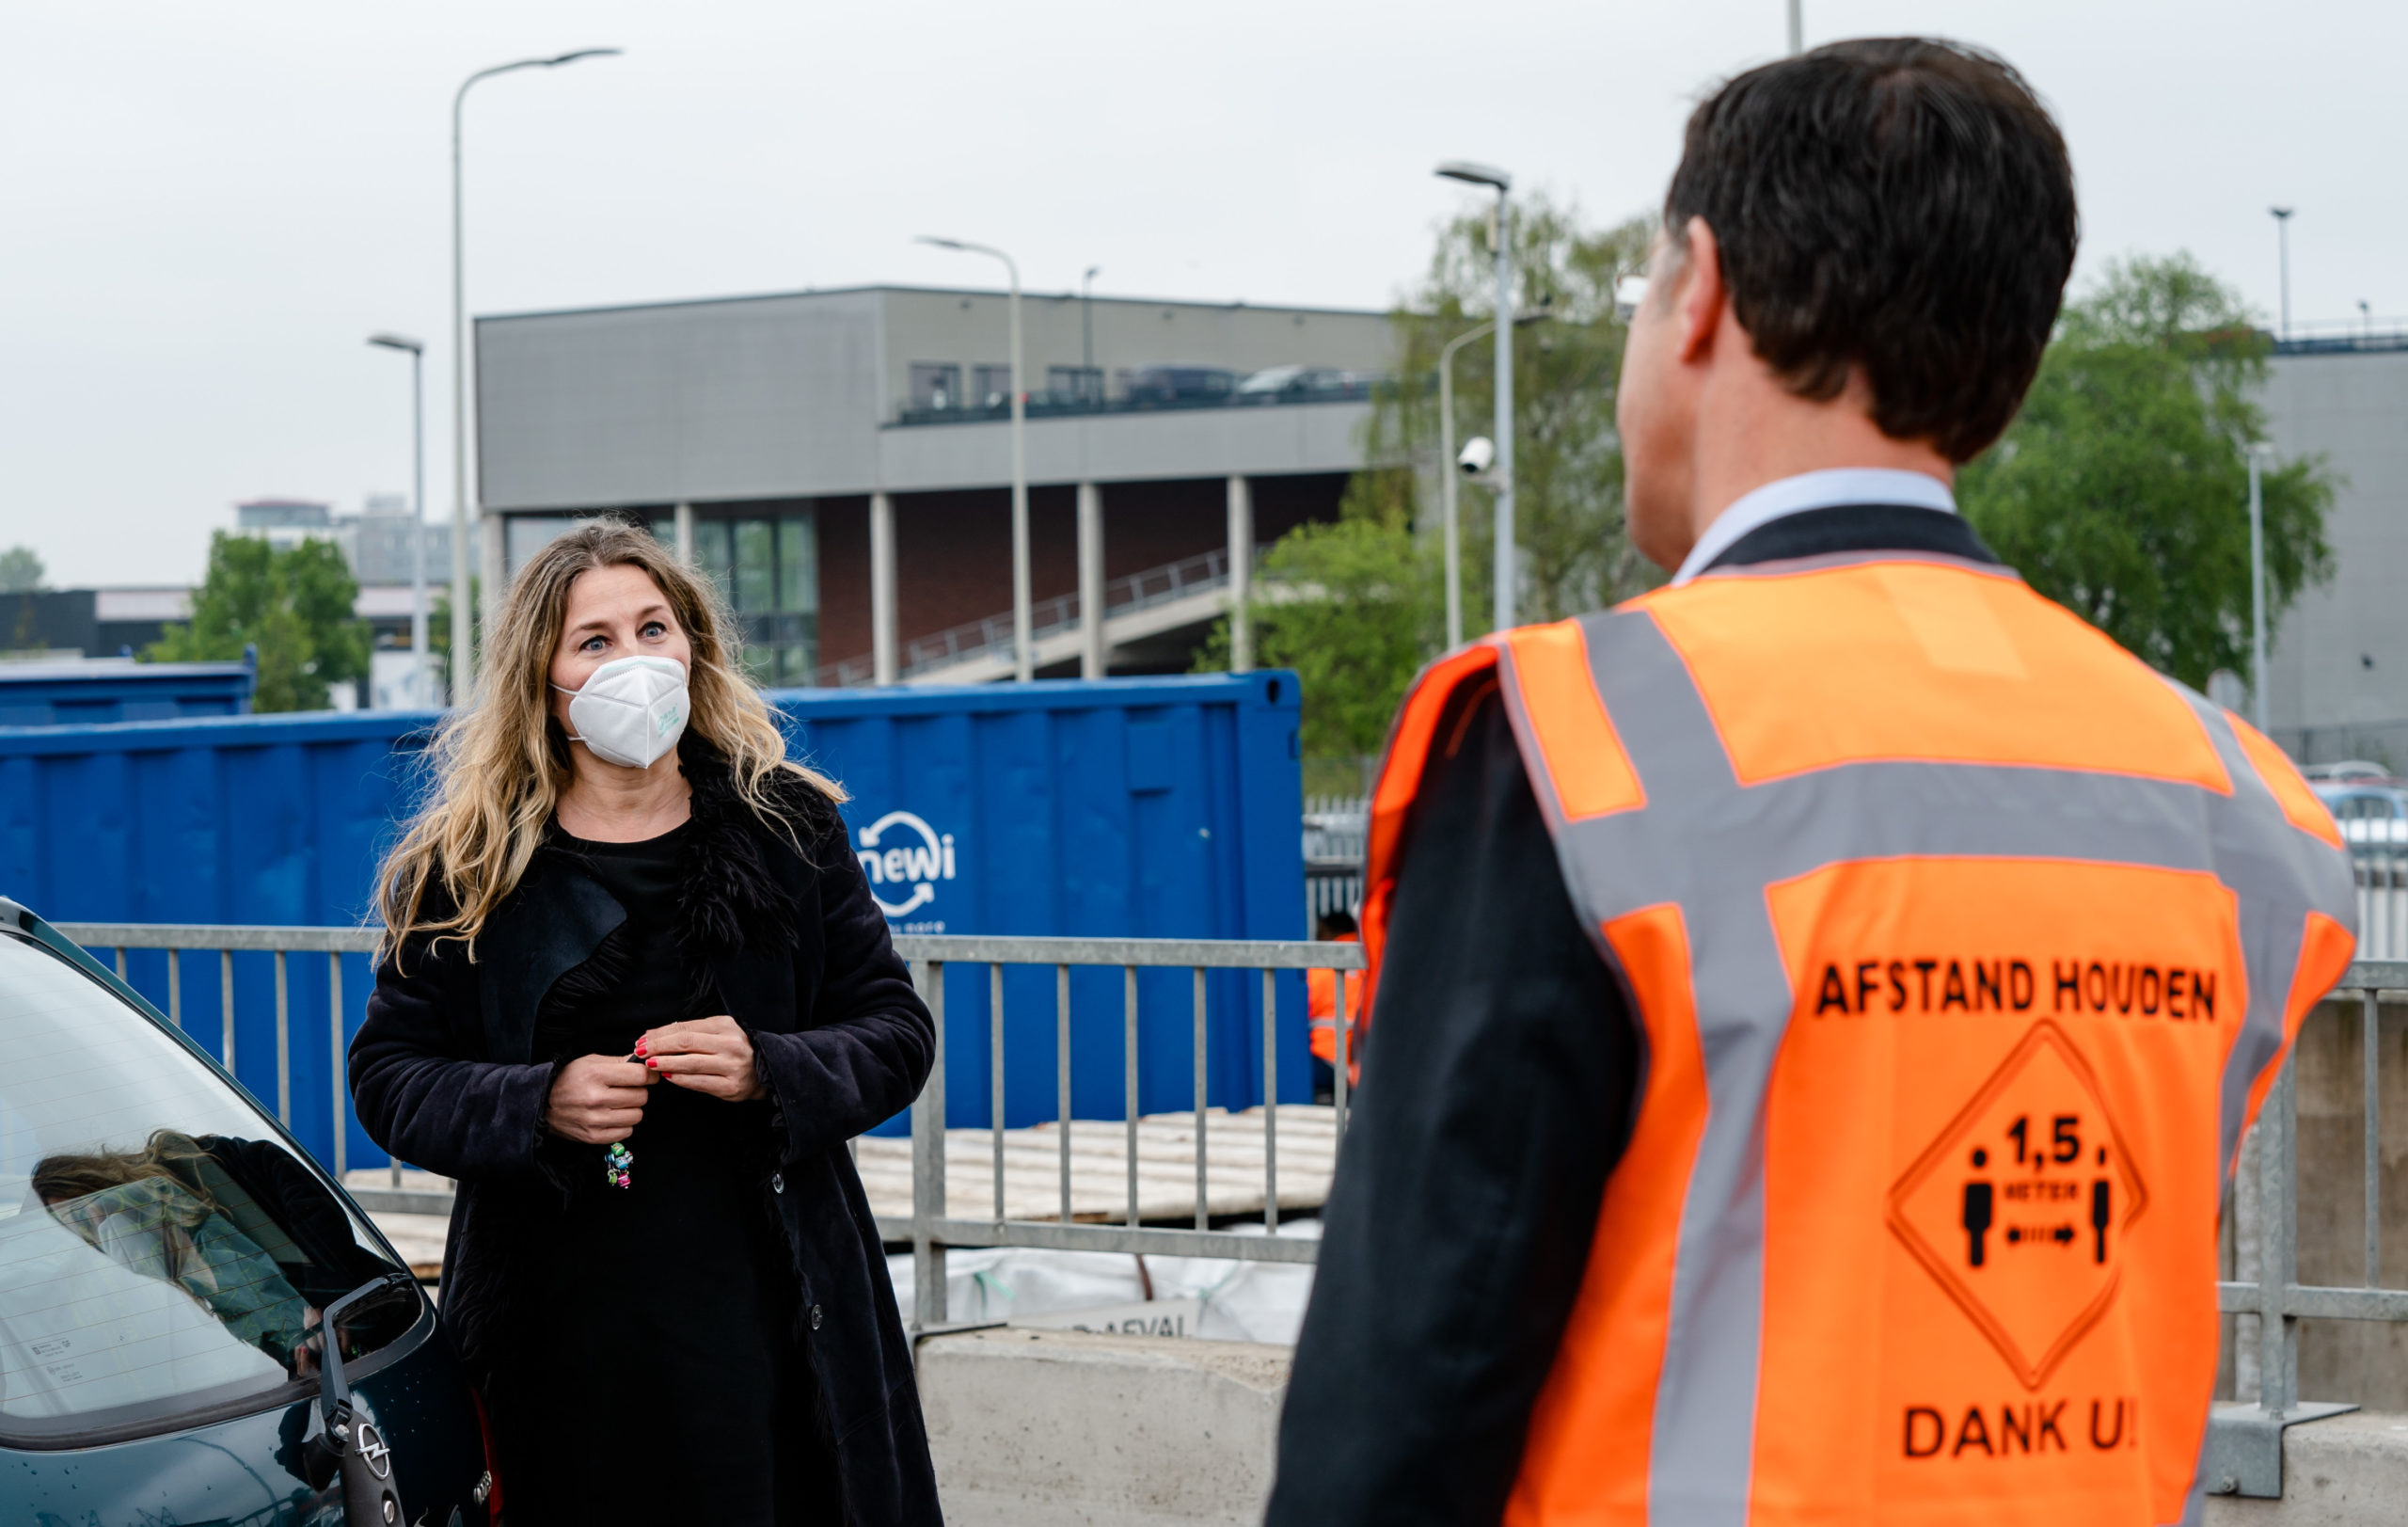 Mark Rutte speaking to a woman wearing a face mask during a site visit to The Hague's refuse collection service.